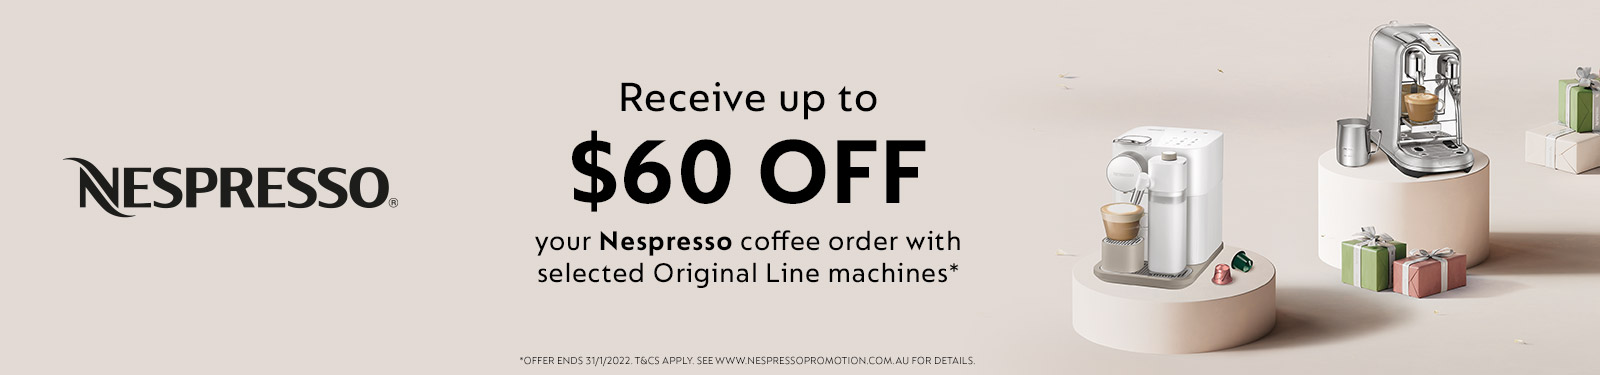 Receive up to $60 off your Nespresso Coffee order with selected Original Line Machines